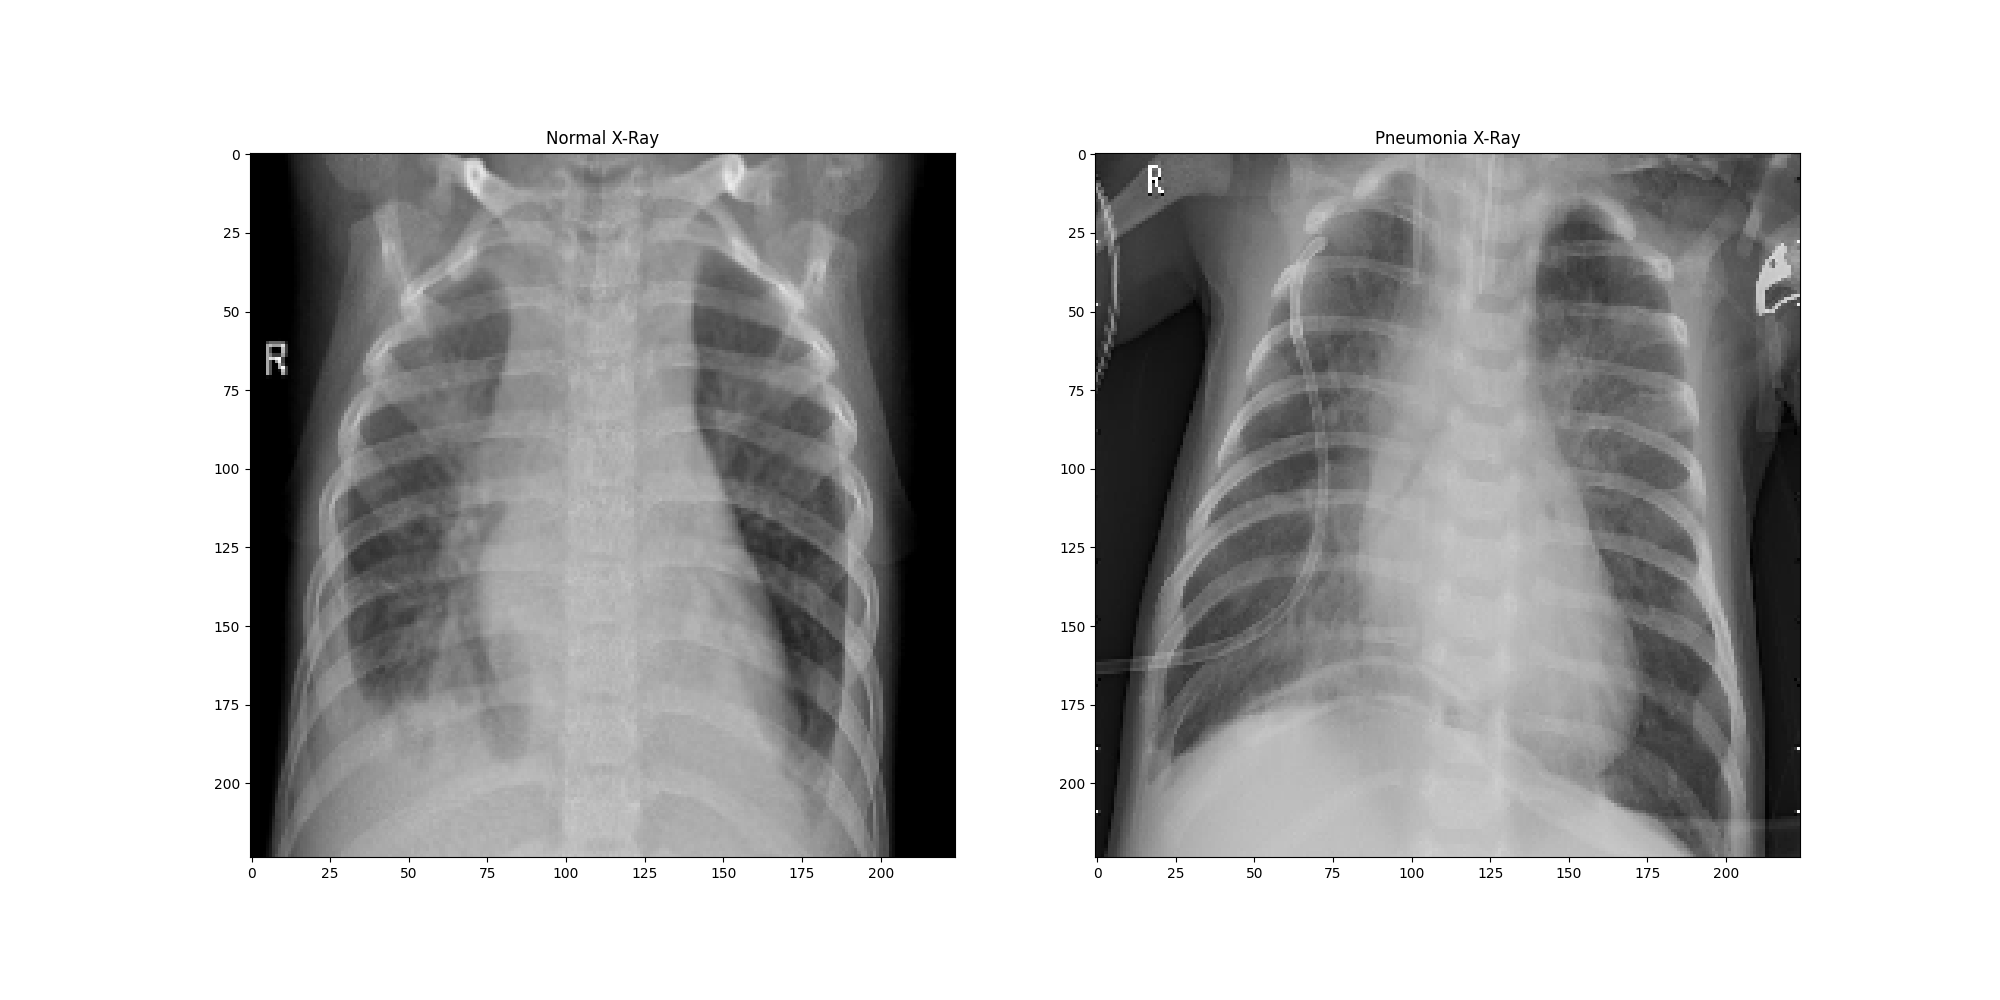 Normal and Pneumonia X-Ray images